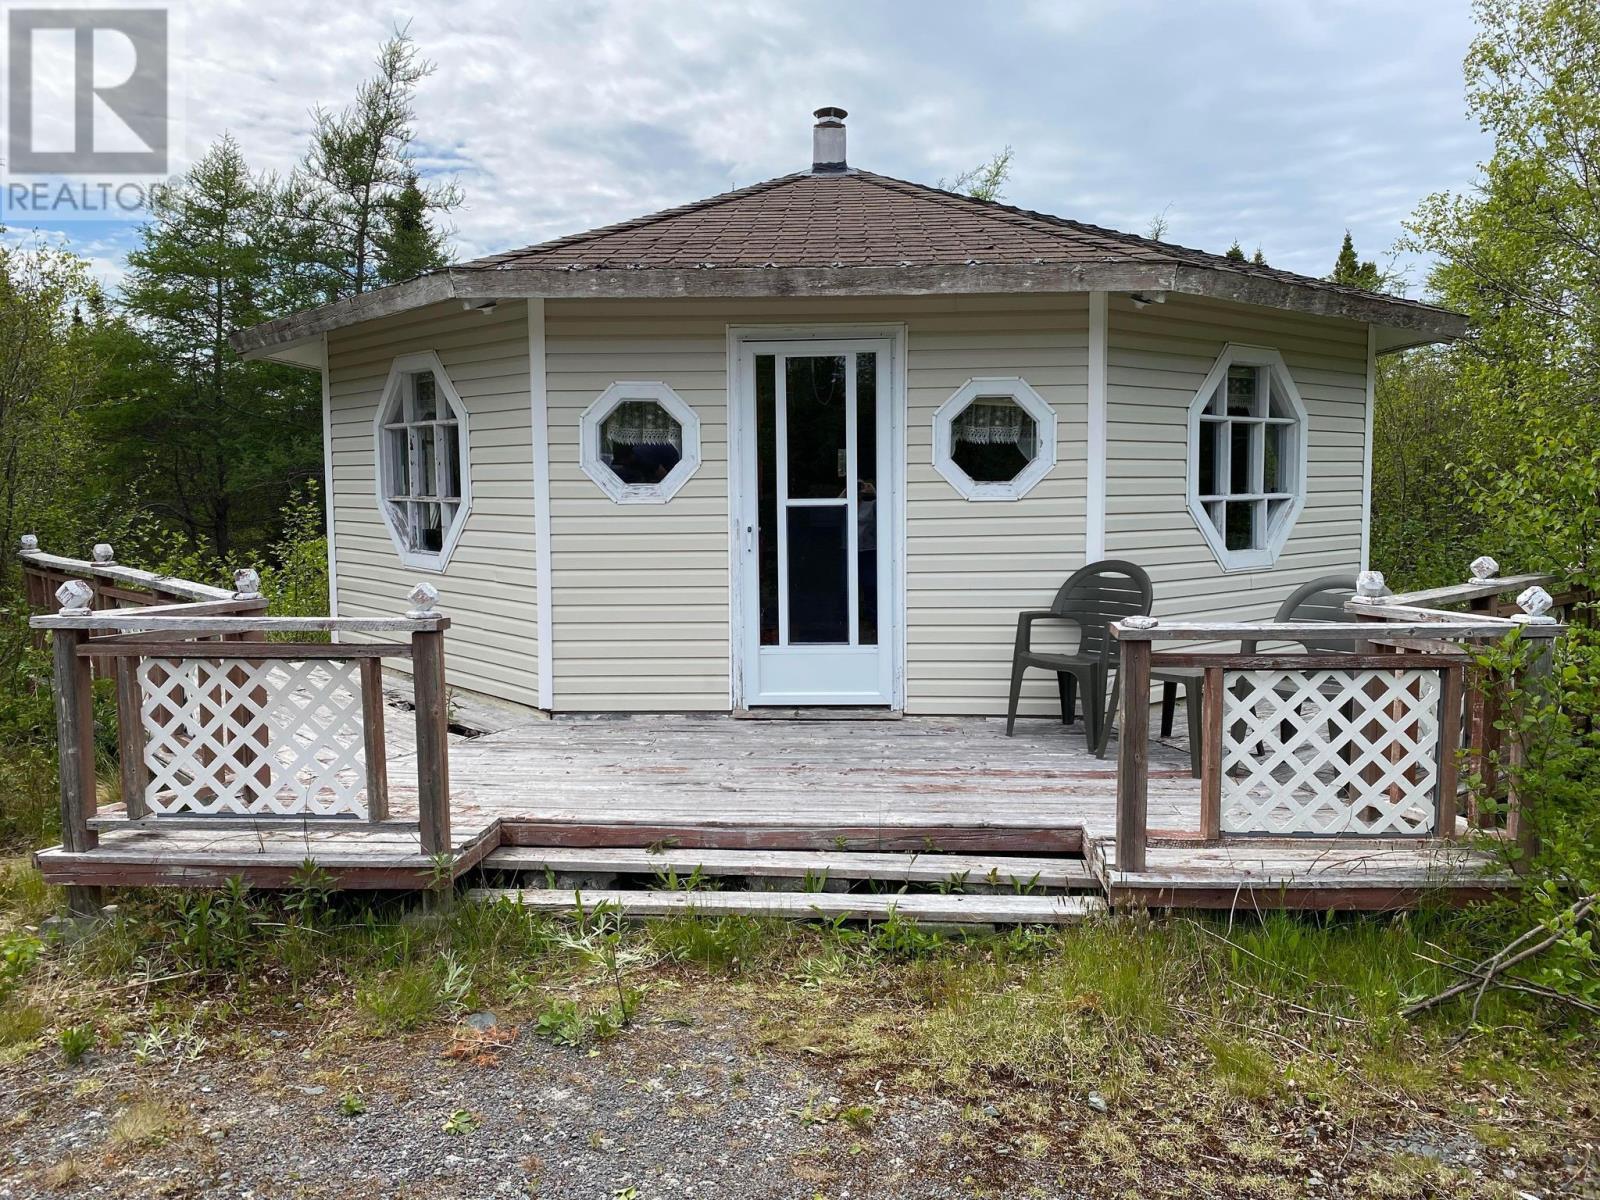 Dennys Pond Road, New Harbour, A0B2P0, 2 Bedrooms Bedrooms, ,1 BathroomBathrooms,Recreational,For sale,Dennys Pond,1268829